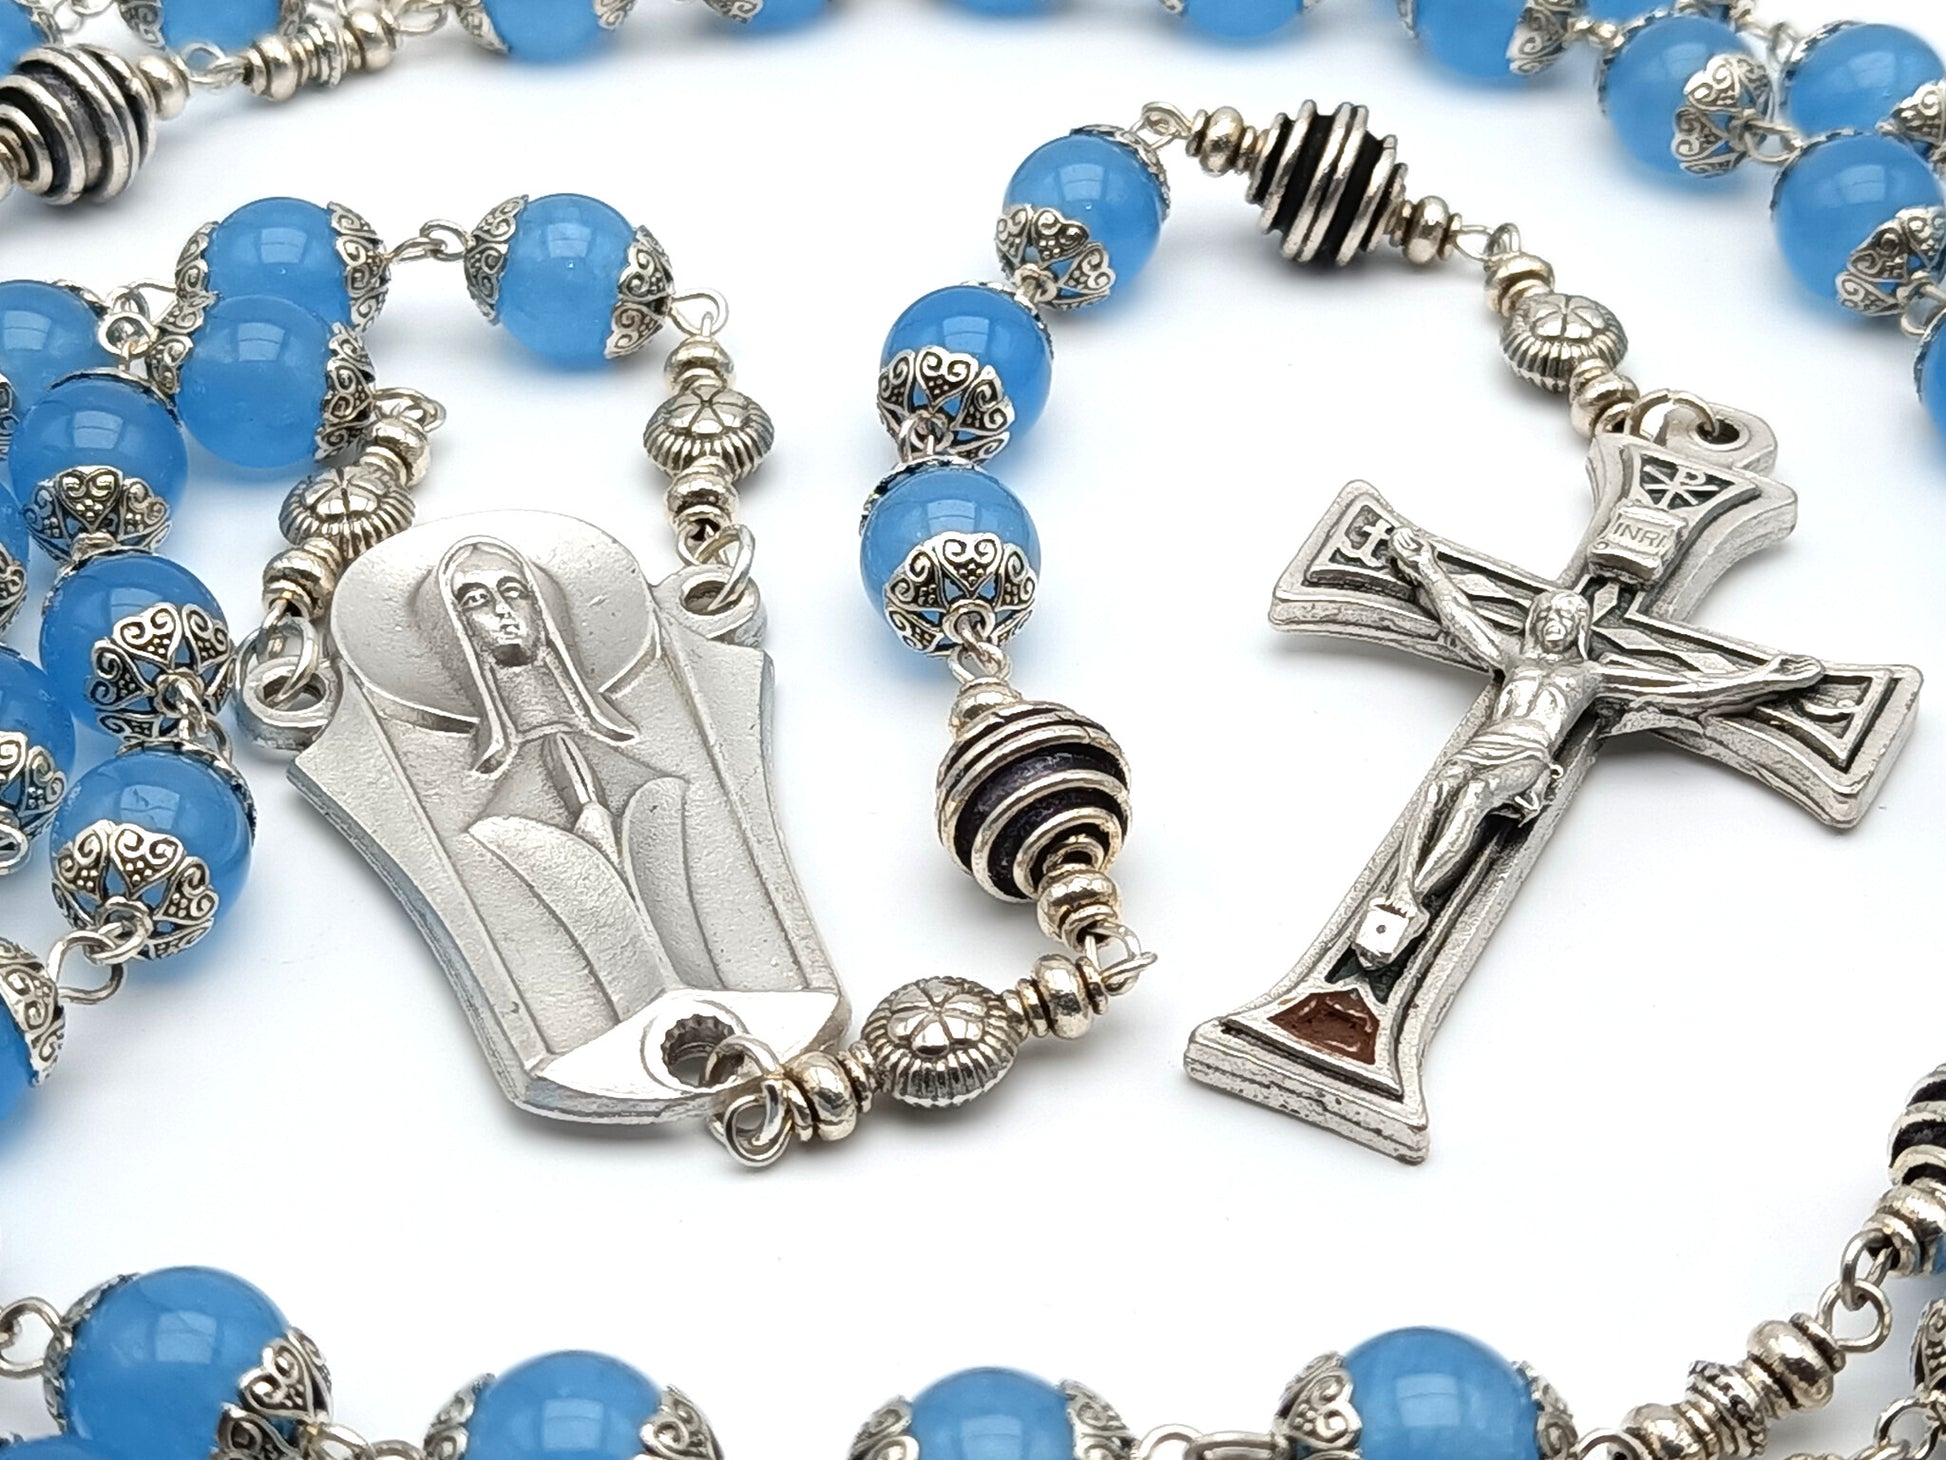 Our Lady of Fatima unique rosary beads with aquamarine gemstone beads, silver crucifix, pater beads and centre medal.